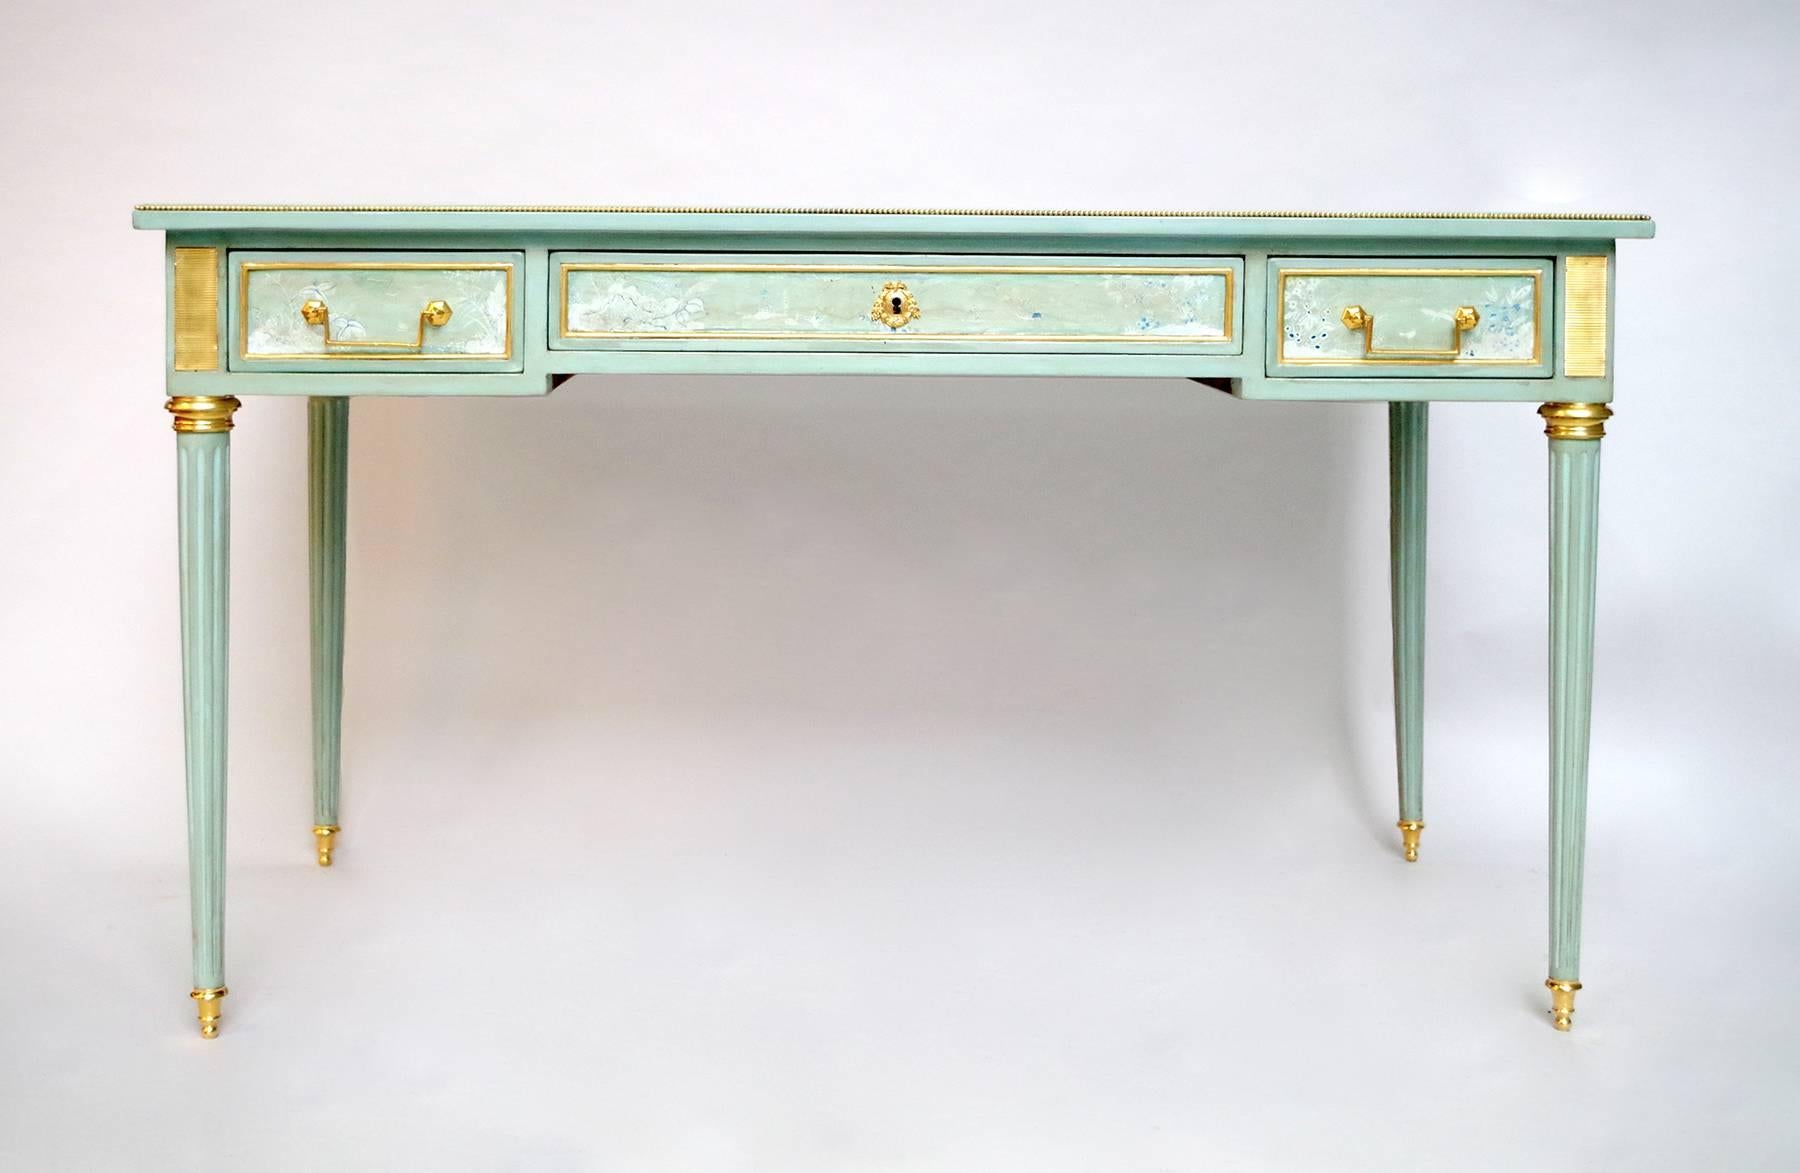 Small Louis XVI style flat desk in celadon lacquer with decoration of Asiatic landscapes on all sides.
Opening with three drawers in the facade and standing on four tapered legs with fluting.
Gilt bronzes decoration like scrappers on angles, lock